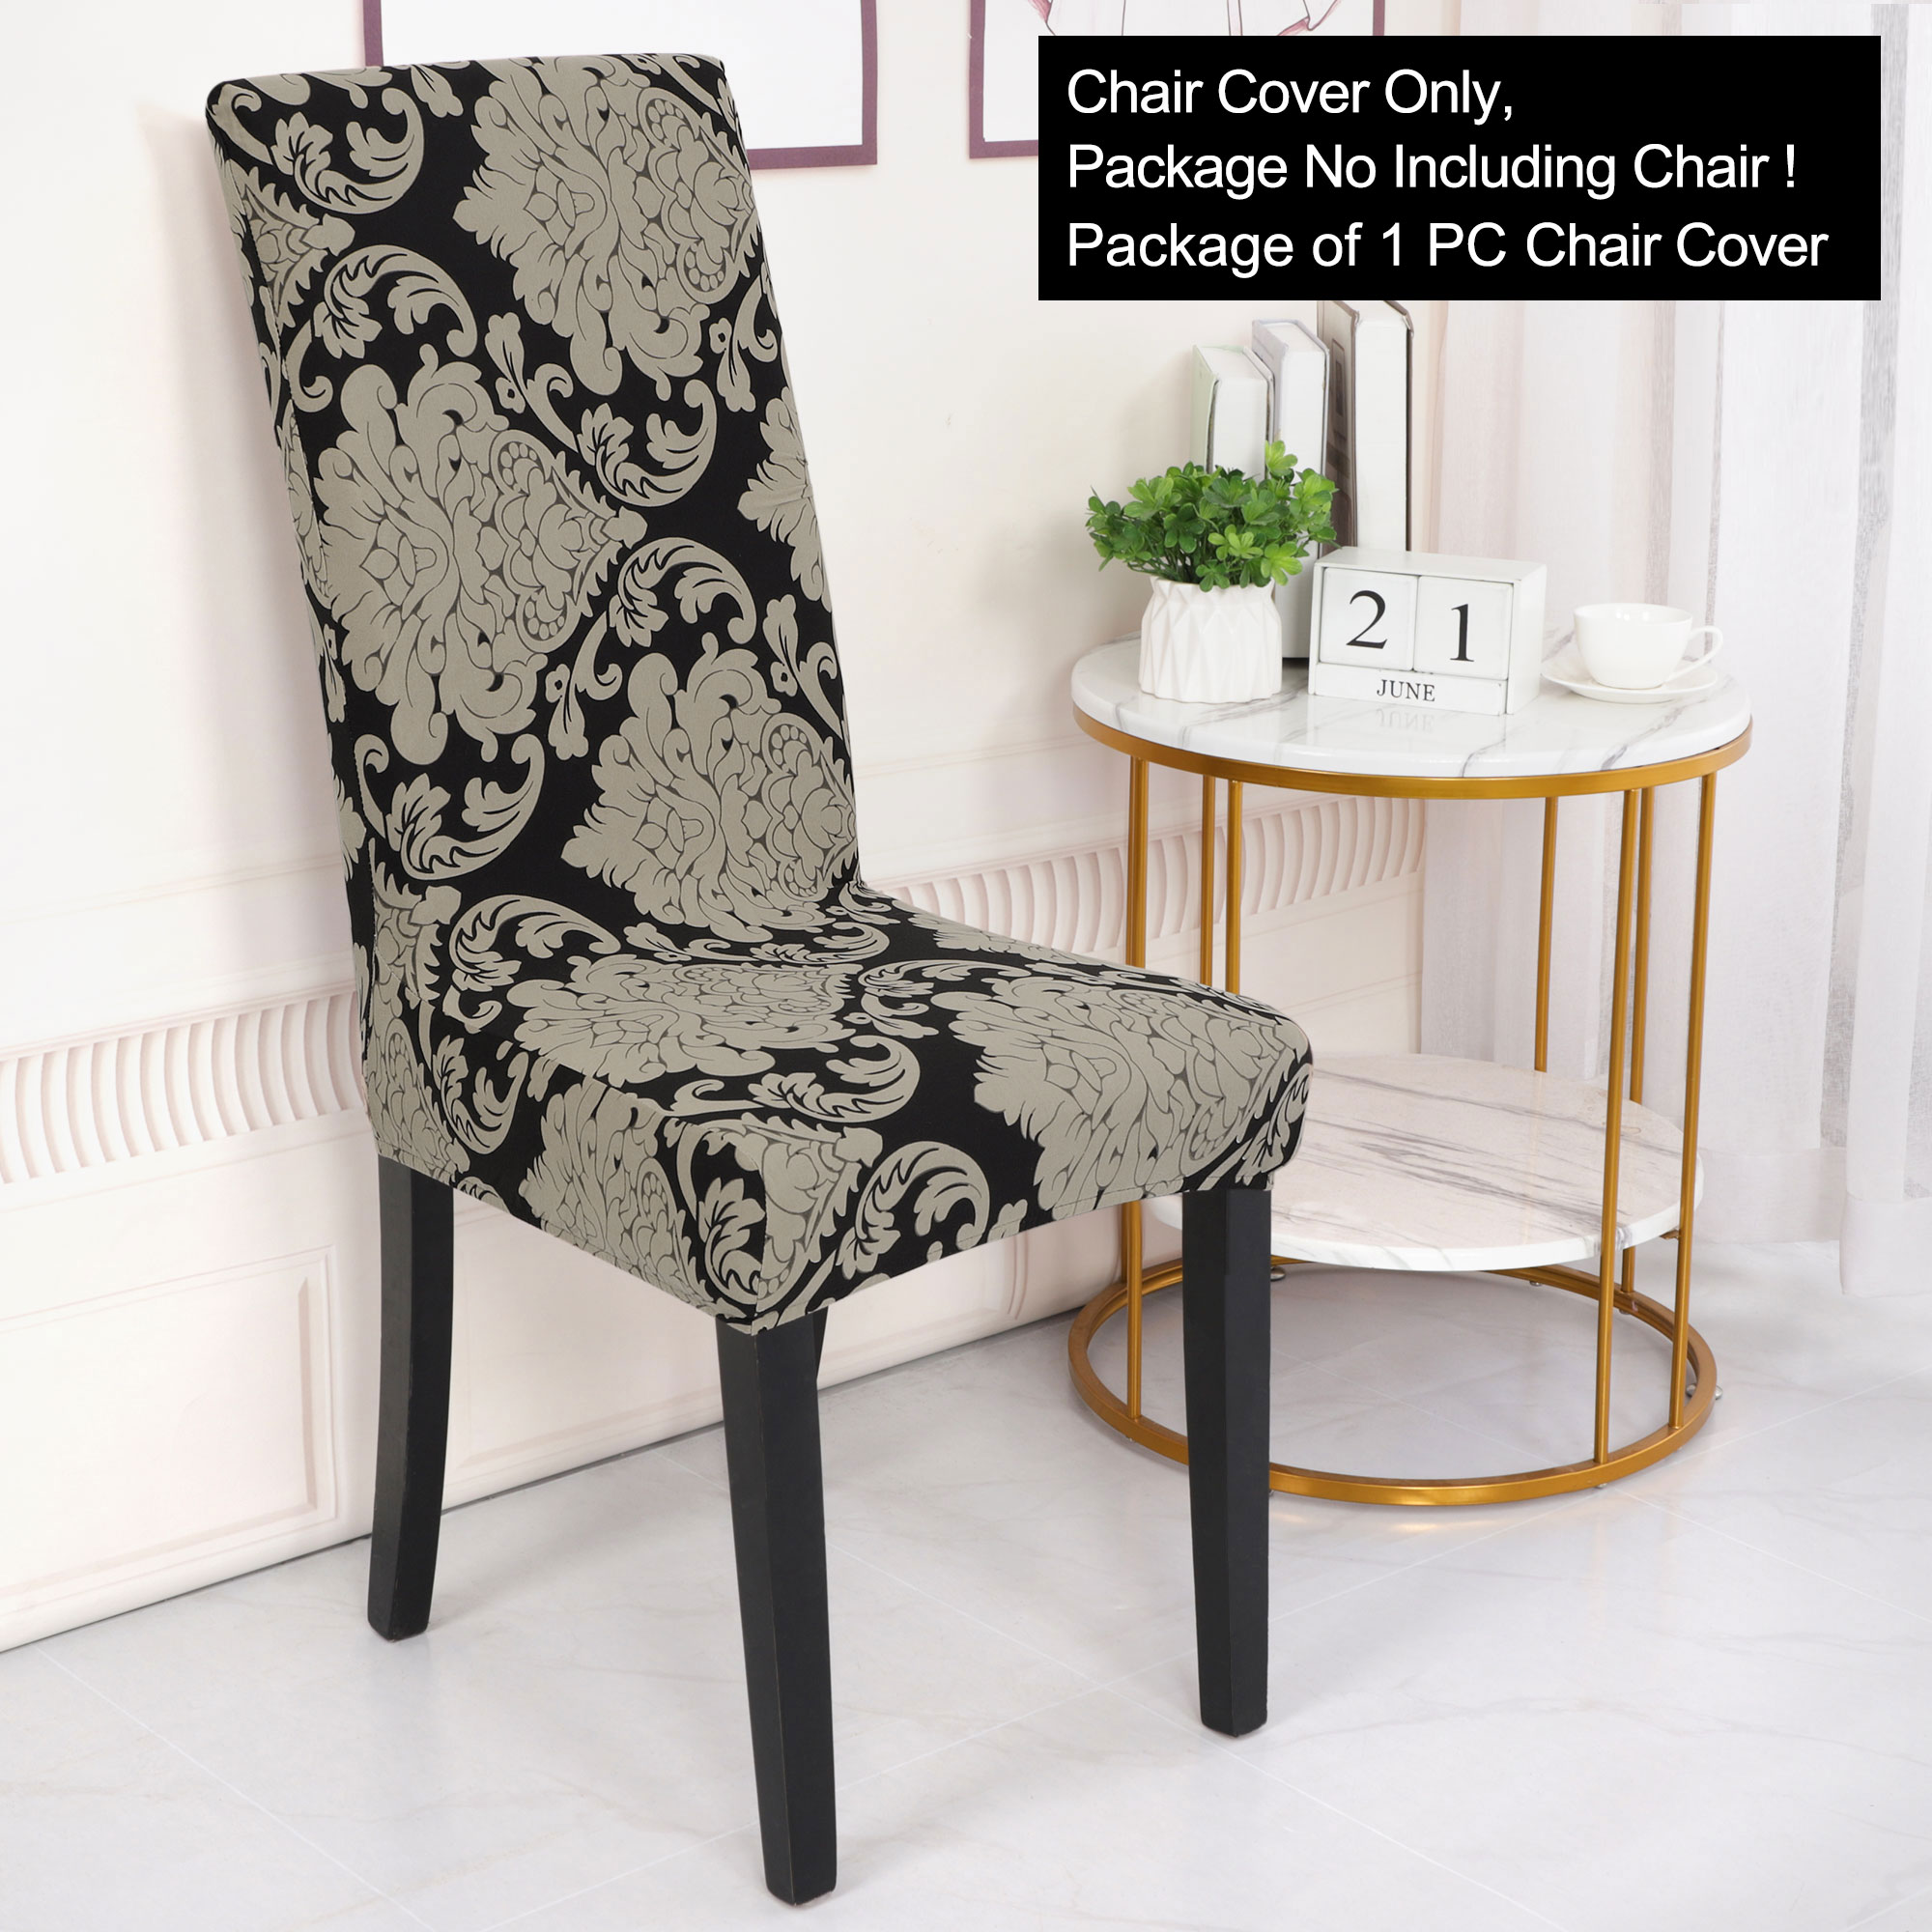 Unique Bargains Dining Chair Cover Stretch Stool Slipcover Chair Seat Protector (M)